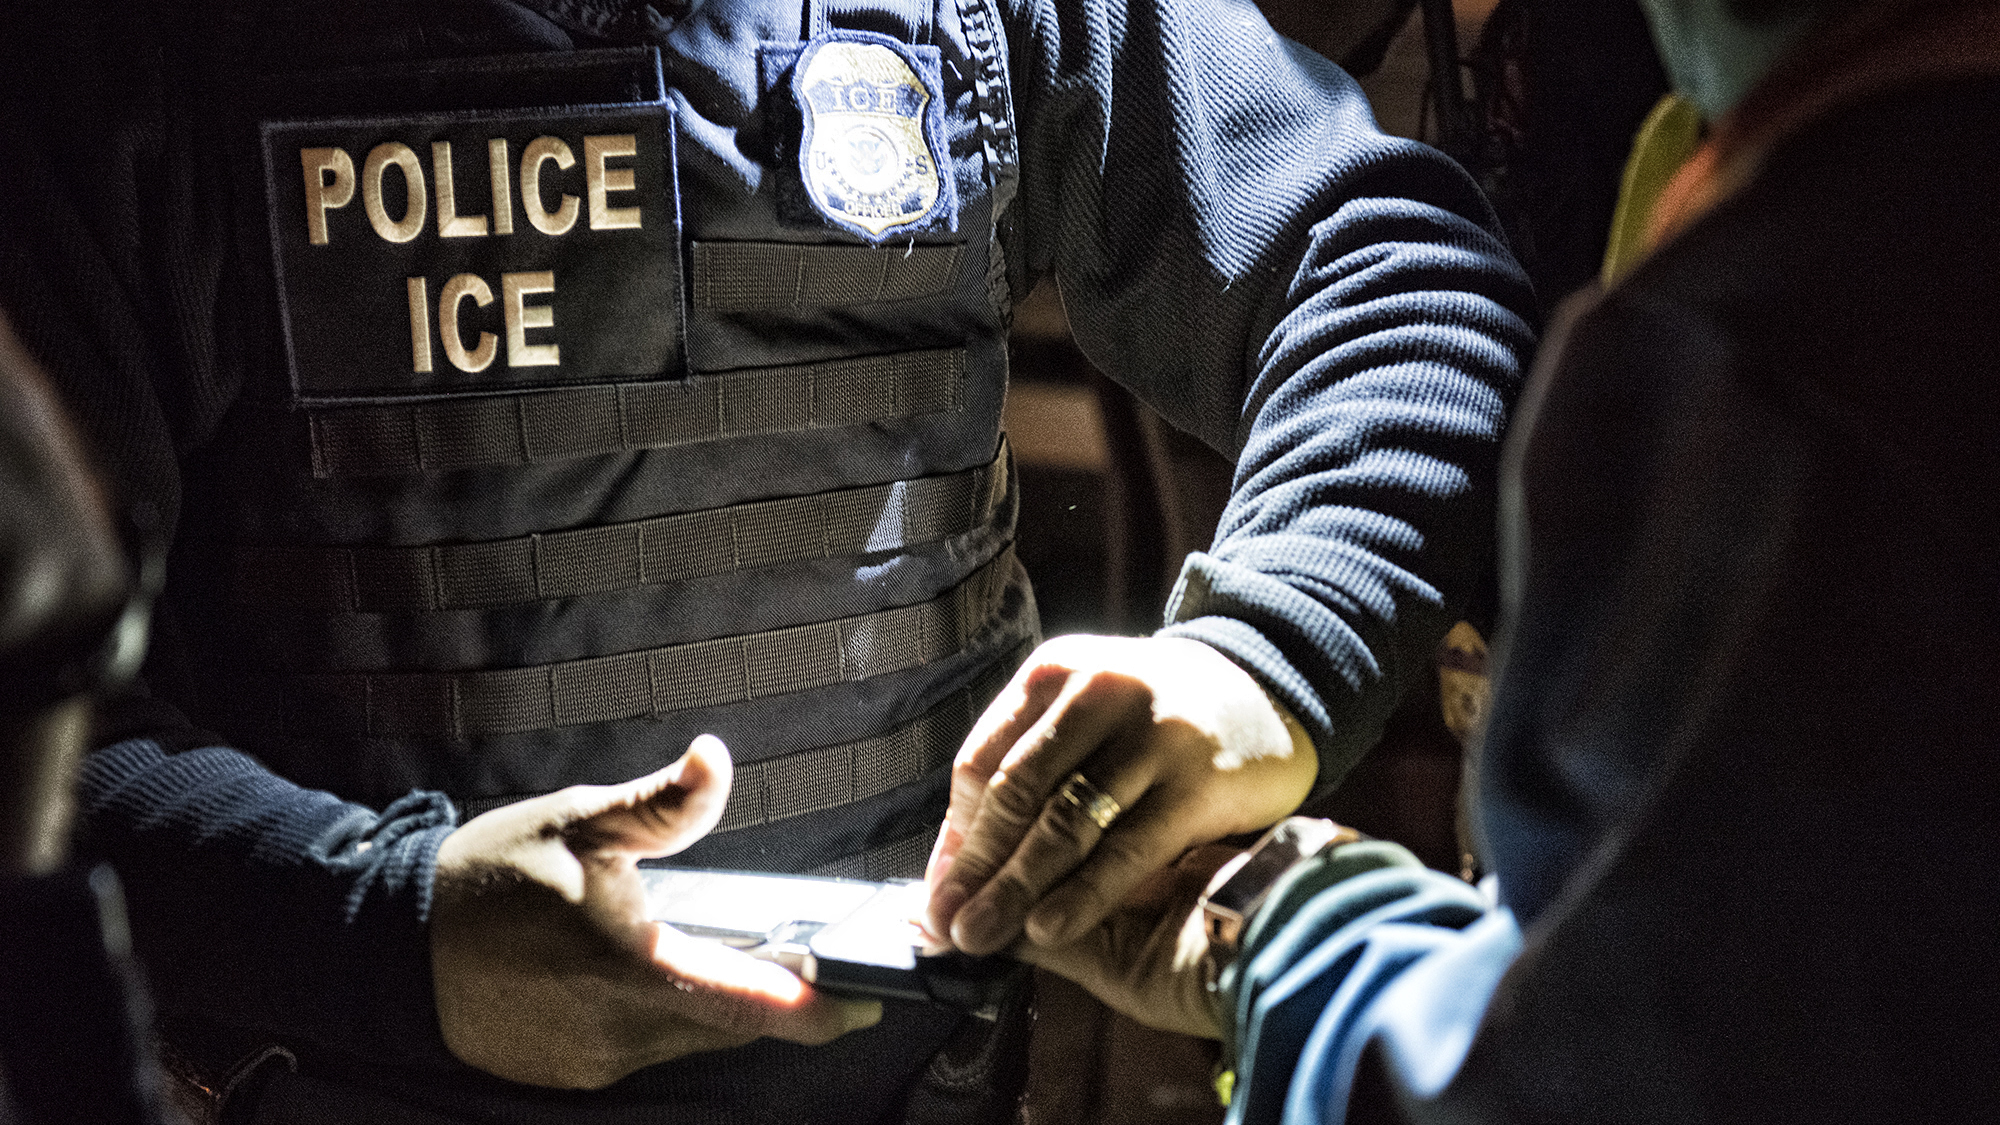 An ERO deportation officer checks fingerprints using a mobile biometric software application in Long Island, N.Y., during Operation Raging Bull, a federal law enforcement operation targeting MS-13.